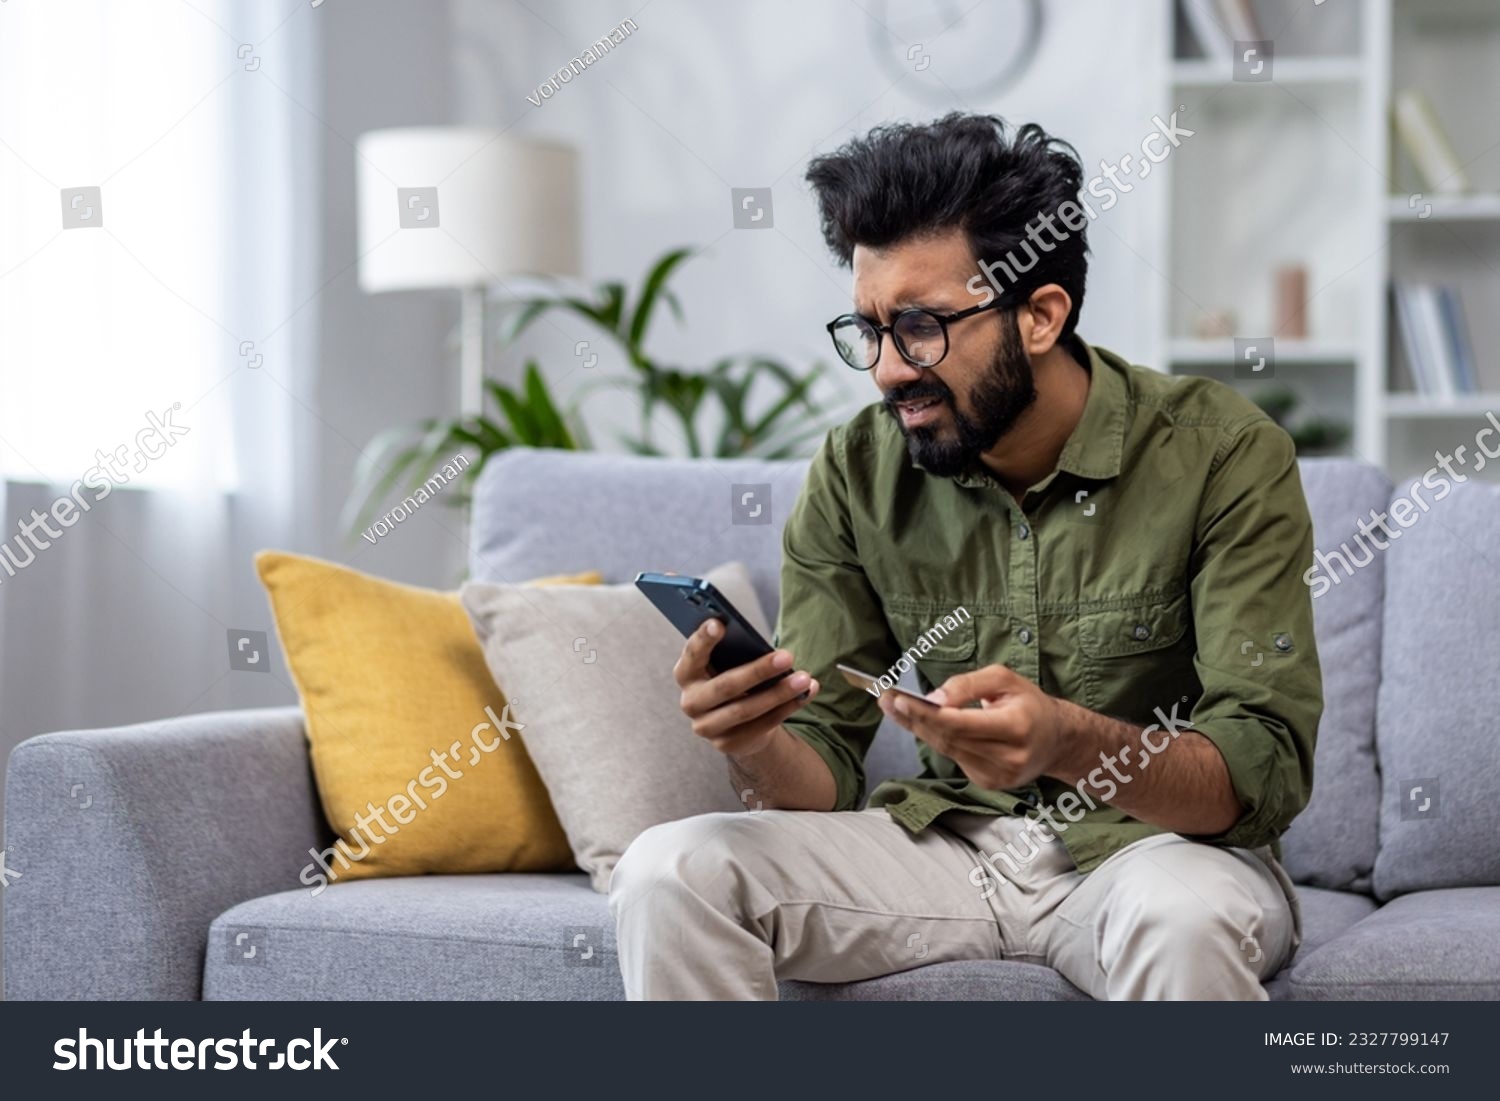 Upset man at home cheated and denied money transfer, hispanic sitting on sofa at home with phone and bank credit card, cheated and disappointed in living room. #2327799147